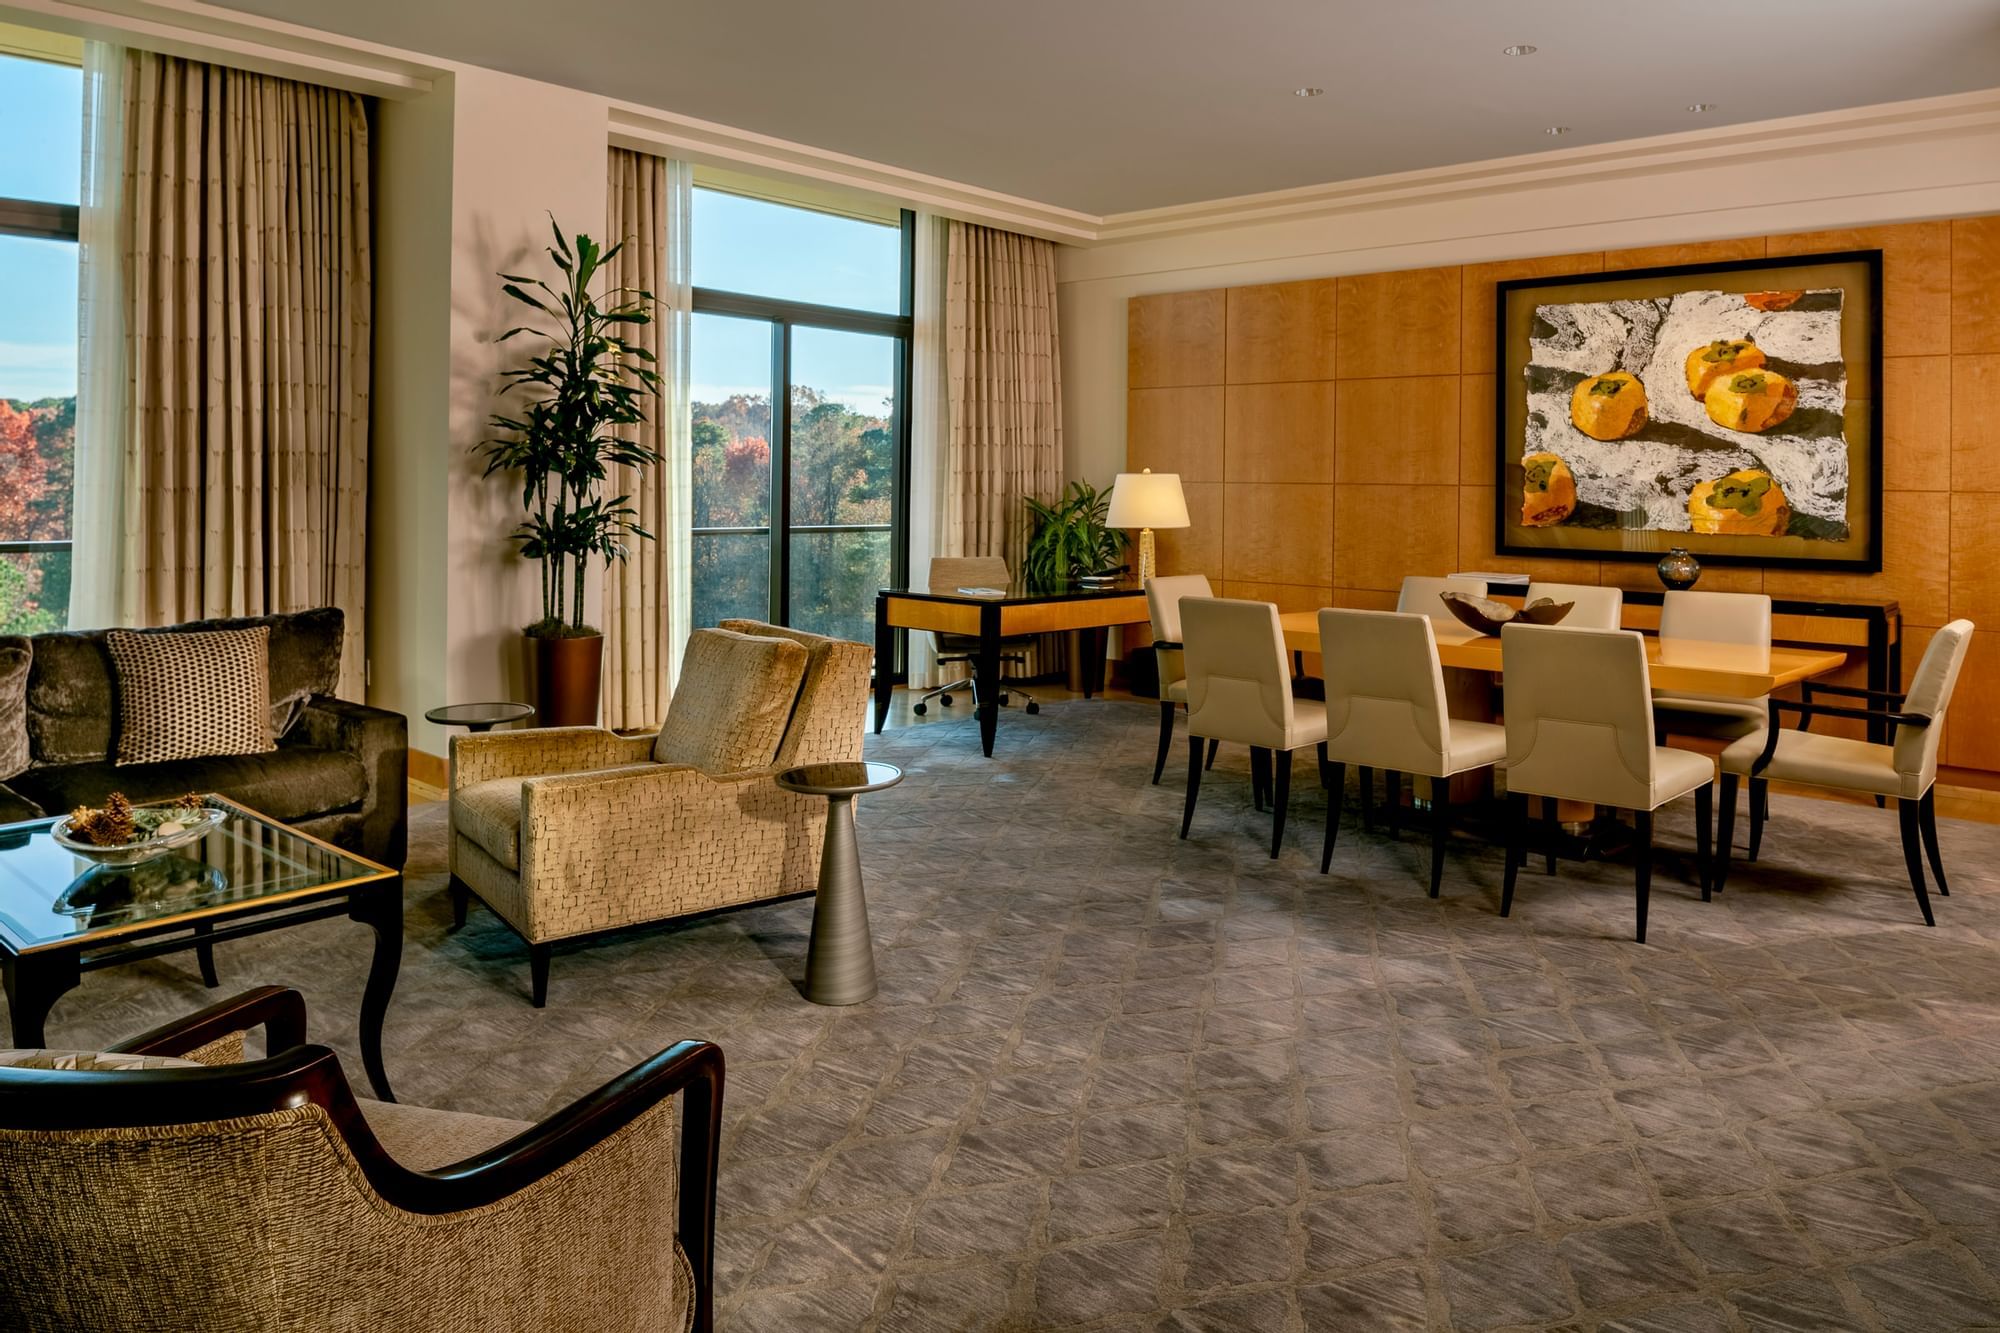 Luxury Presidential Suite with original artwork, custom carpets & furniture in exotic woods at The Umstead Hotel and Spa